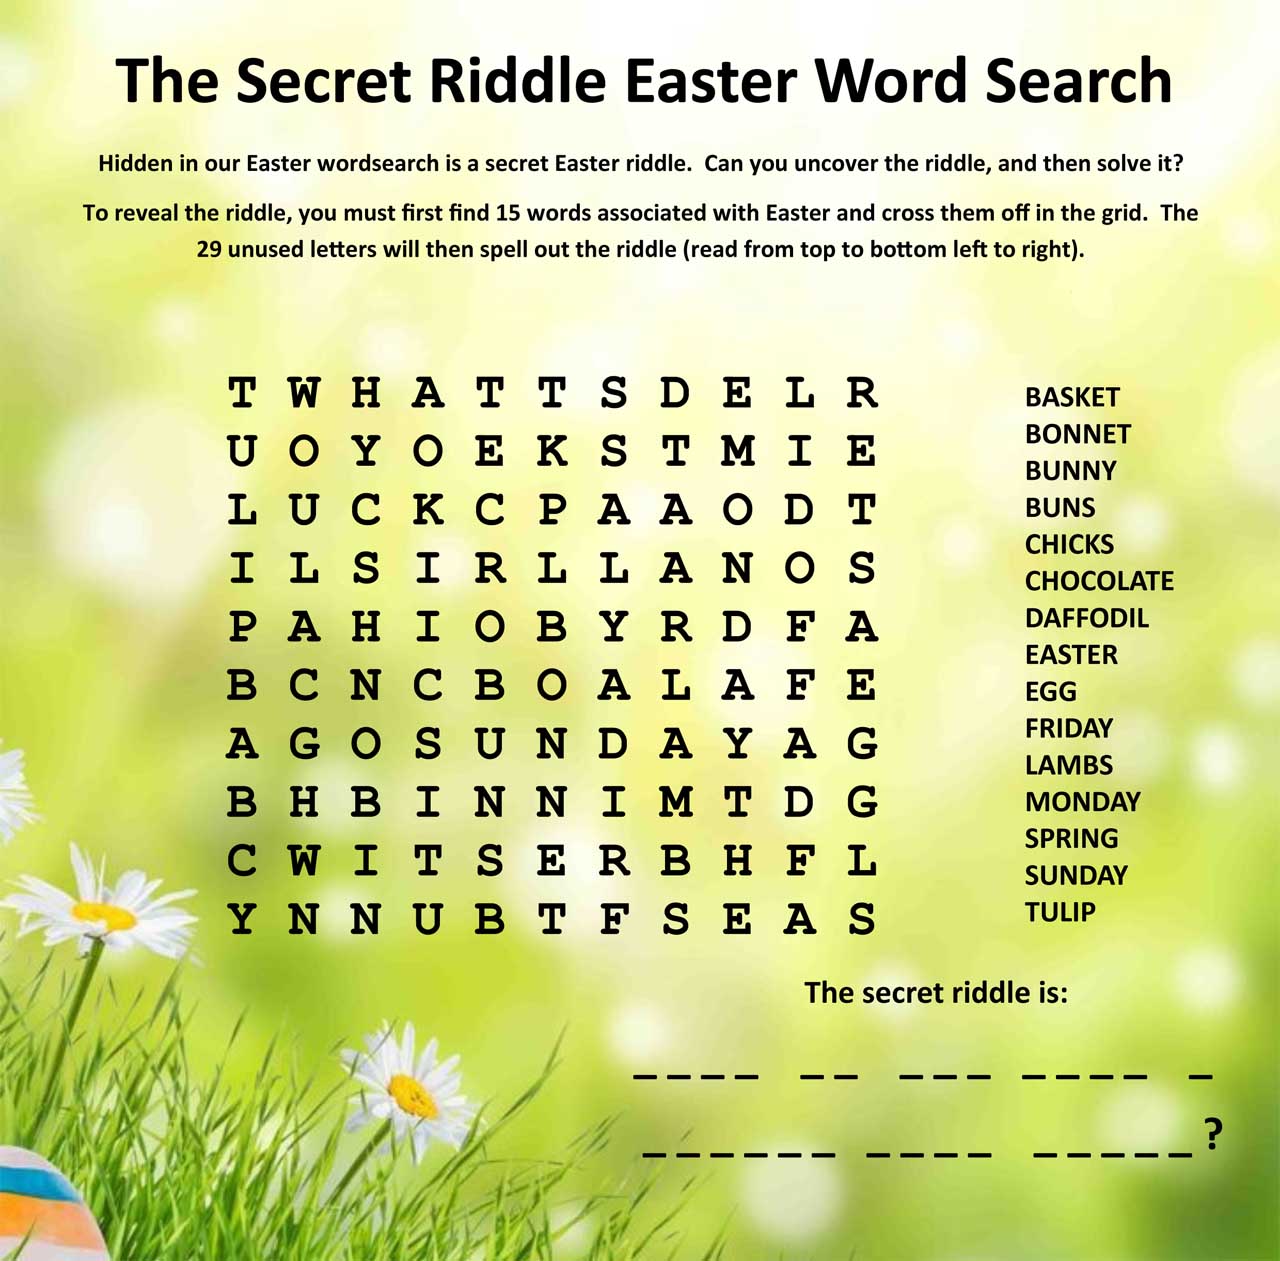 The secret riddle Easter wordsearch